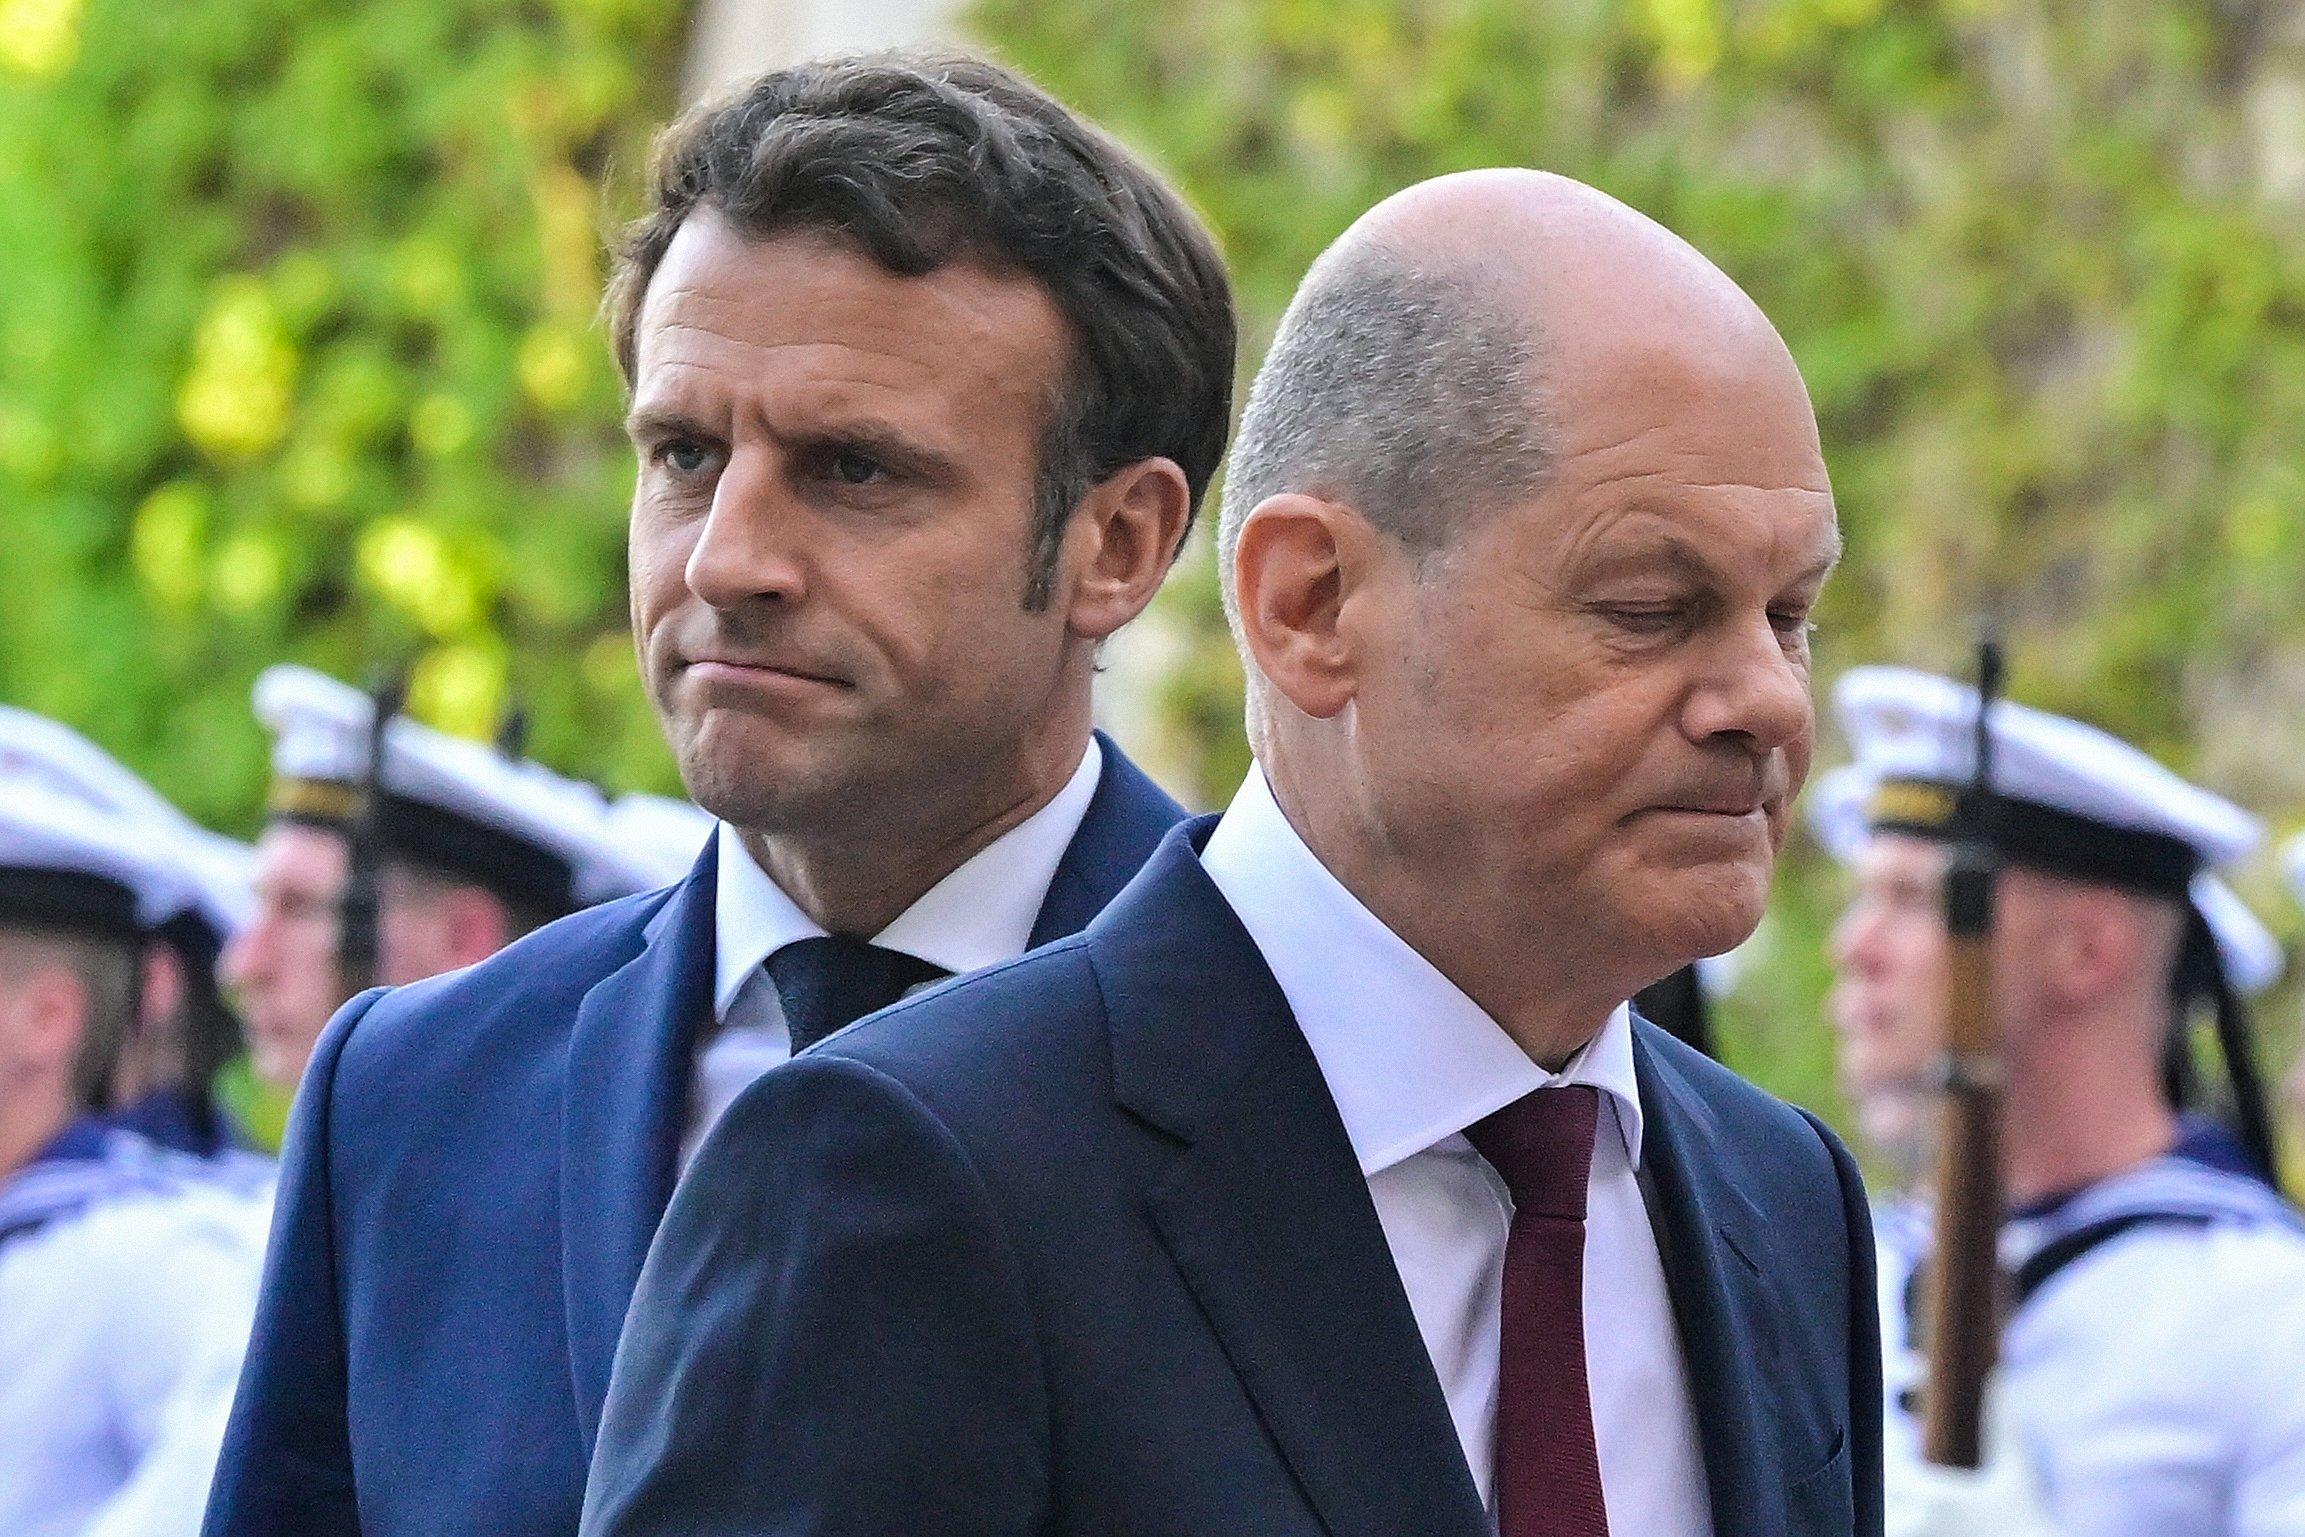 (FILES) In this file photo taken on May 9, 2022 German Chancellor Olaf Scholz (R) and French President Emmanuel Macron make their way inside after inspecting an honor guard during a welcome ceremony at the Chancellery in Berlin. - A war in his backyard, galloping economic crisis, and unhappy partners at home and abroad -- German Chancellor Olaf Scholz has weathered unprecedented shocks in his first year while struggling to make a mark on the global stage. (Photo by John MACDOUGALL / AFP) / NO USE AFTER JANUARY 1, 2023 15:45:50 GMT - ALTERNATIVE CROP  - ALTERNATIVE CROP